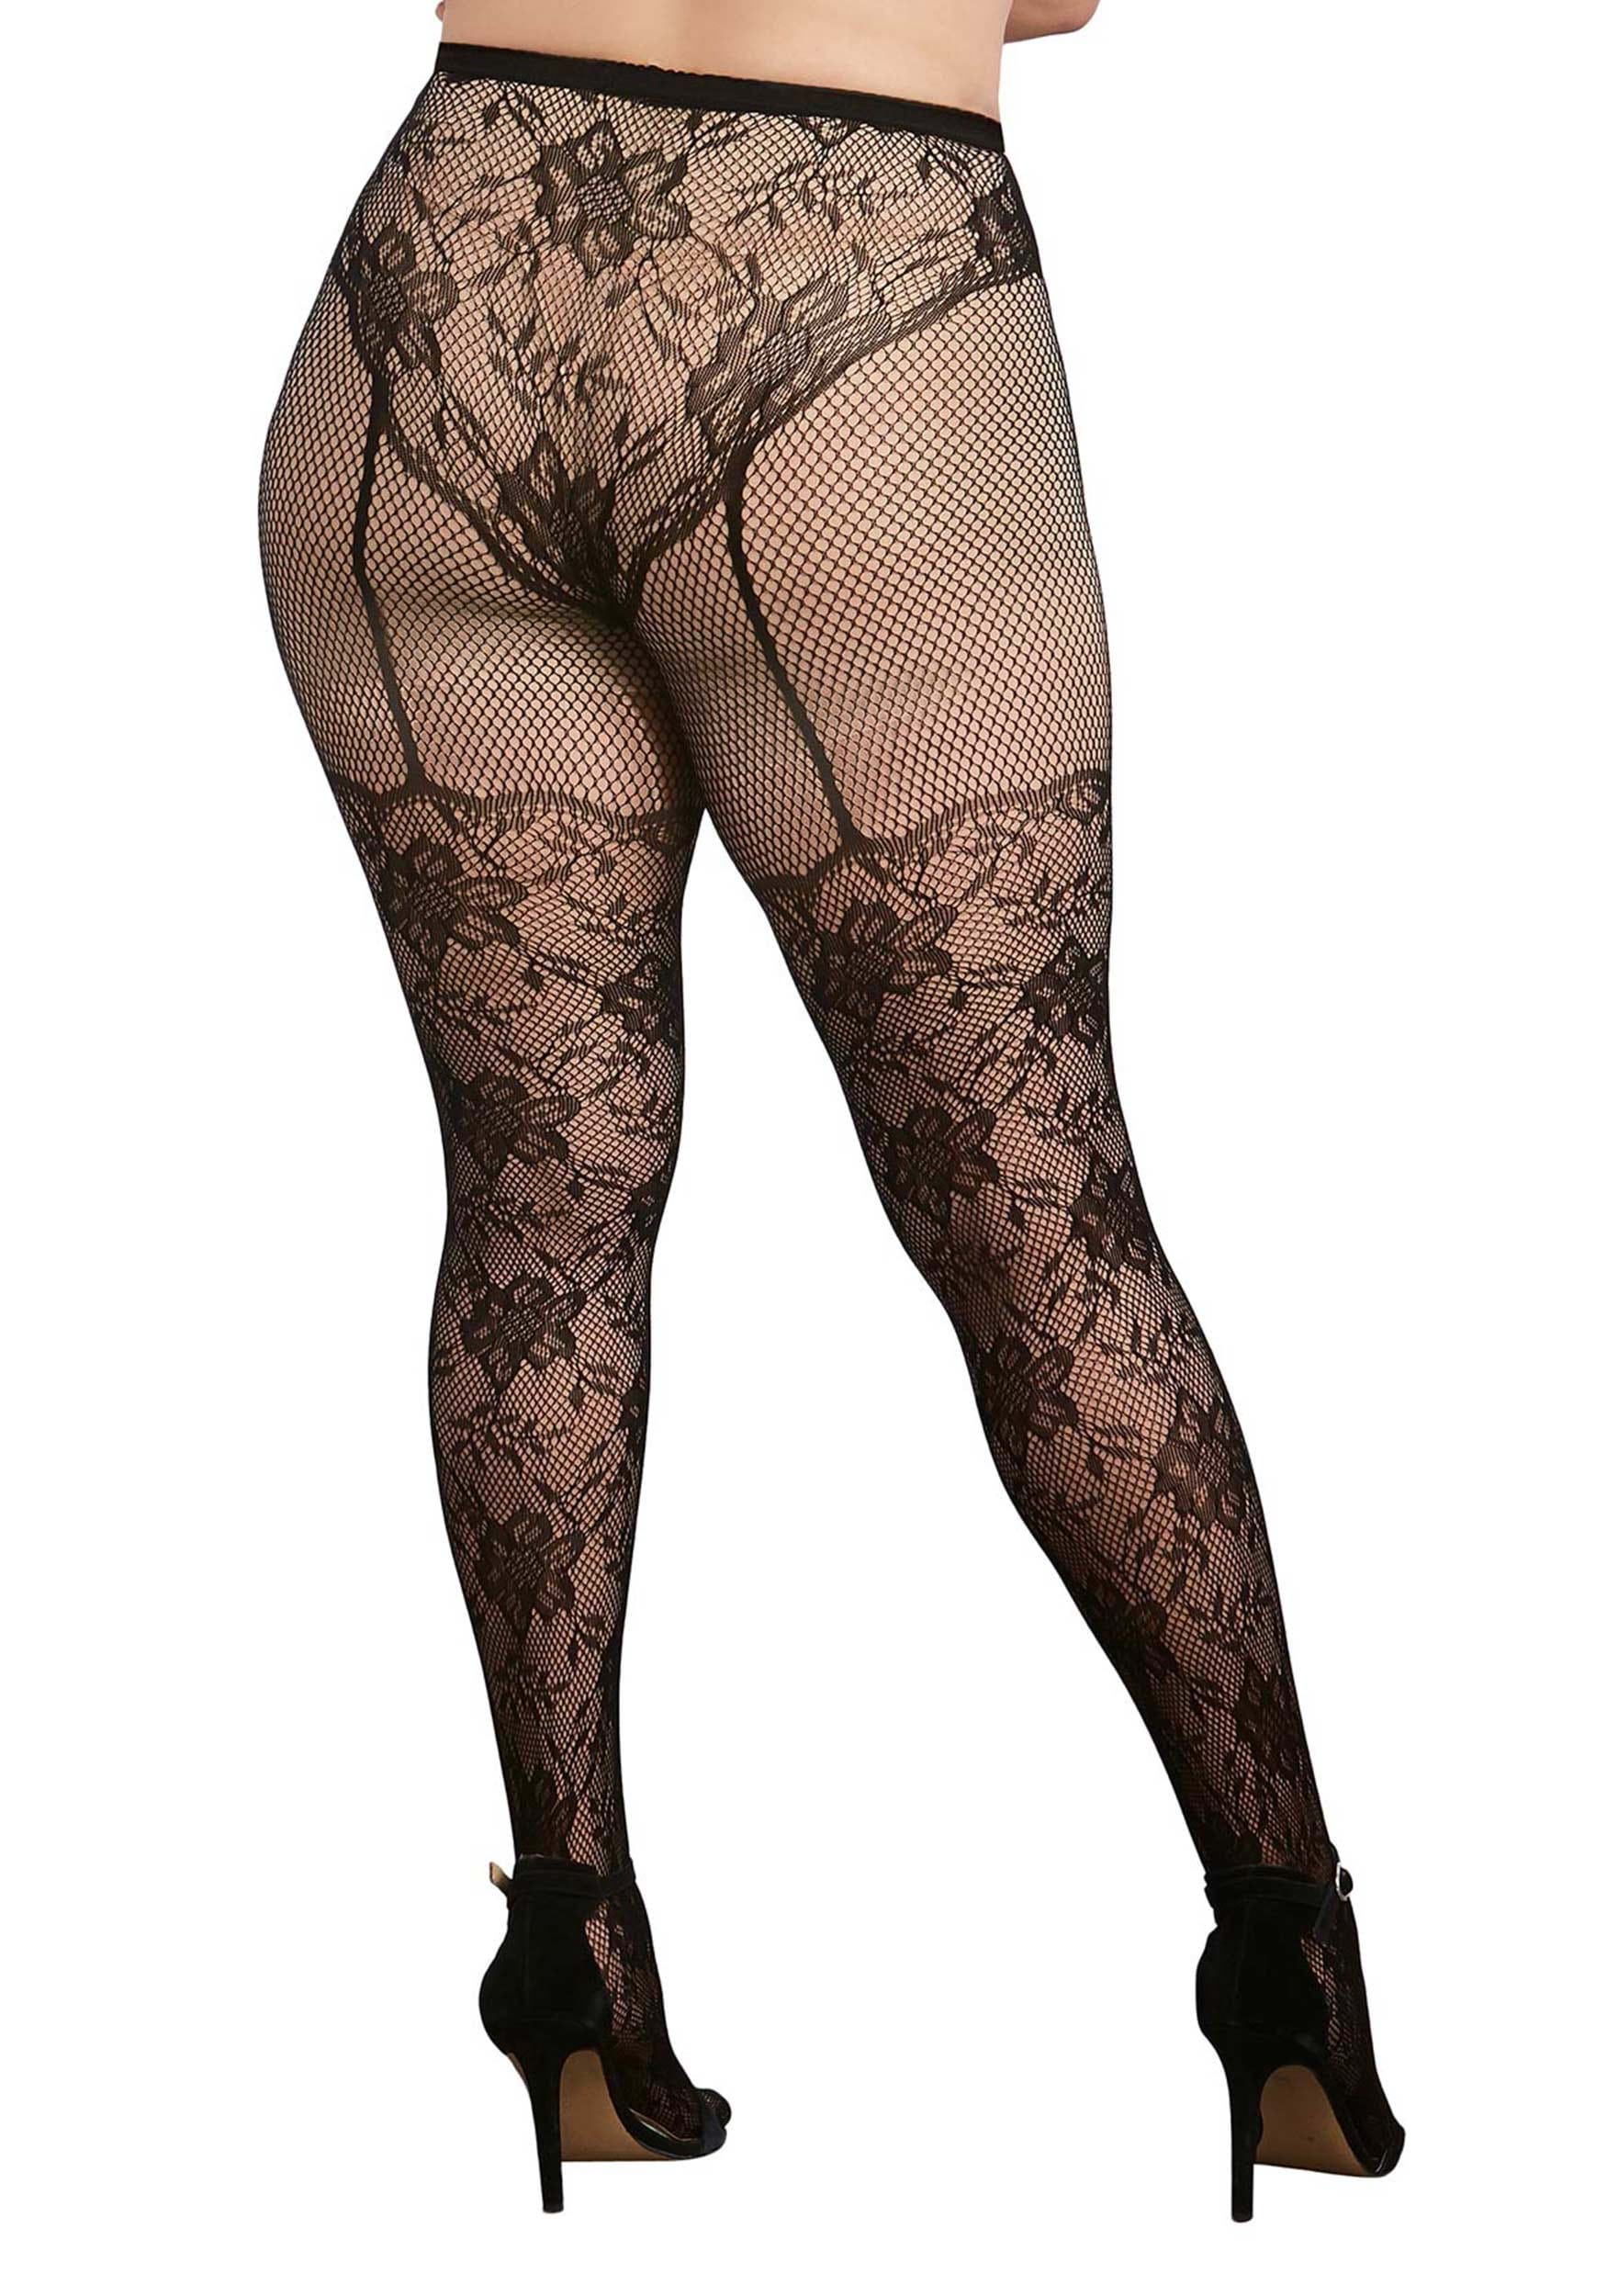 Black Lace Print Women's Fishnets With Faux Panty